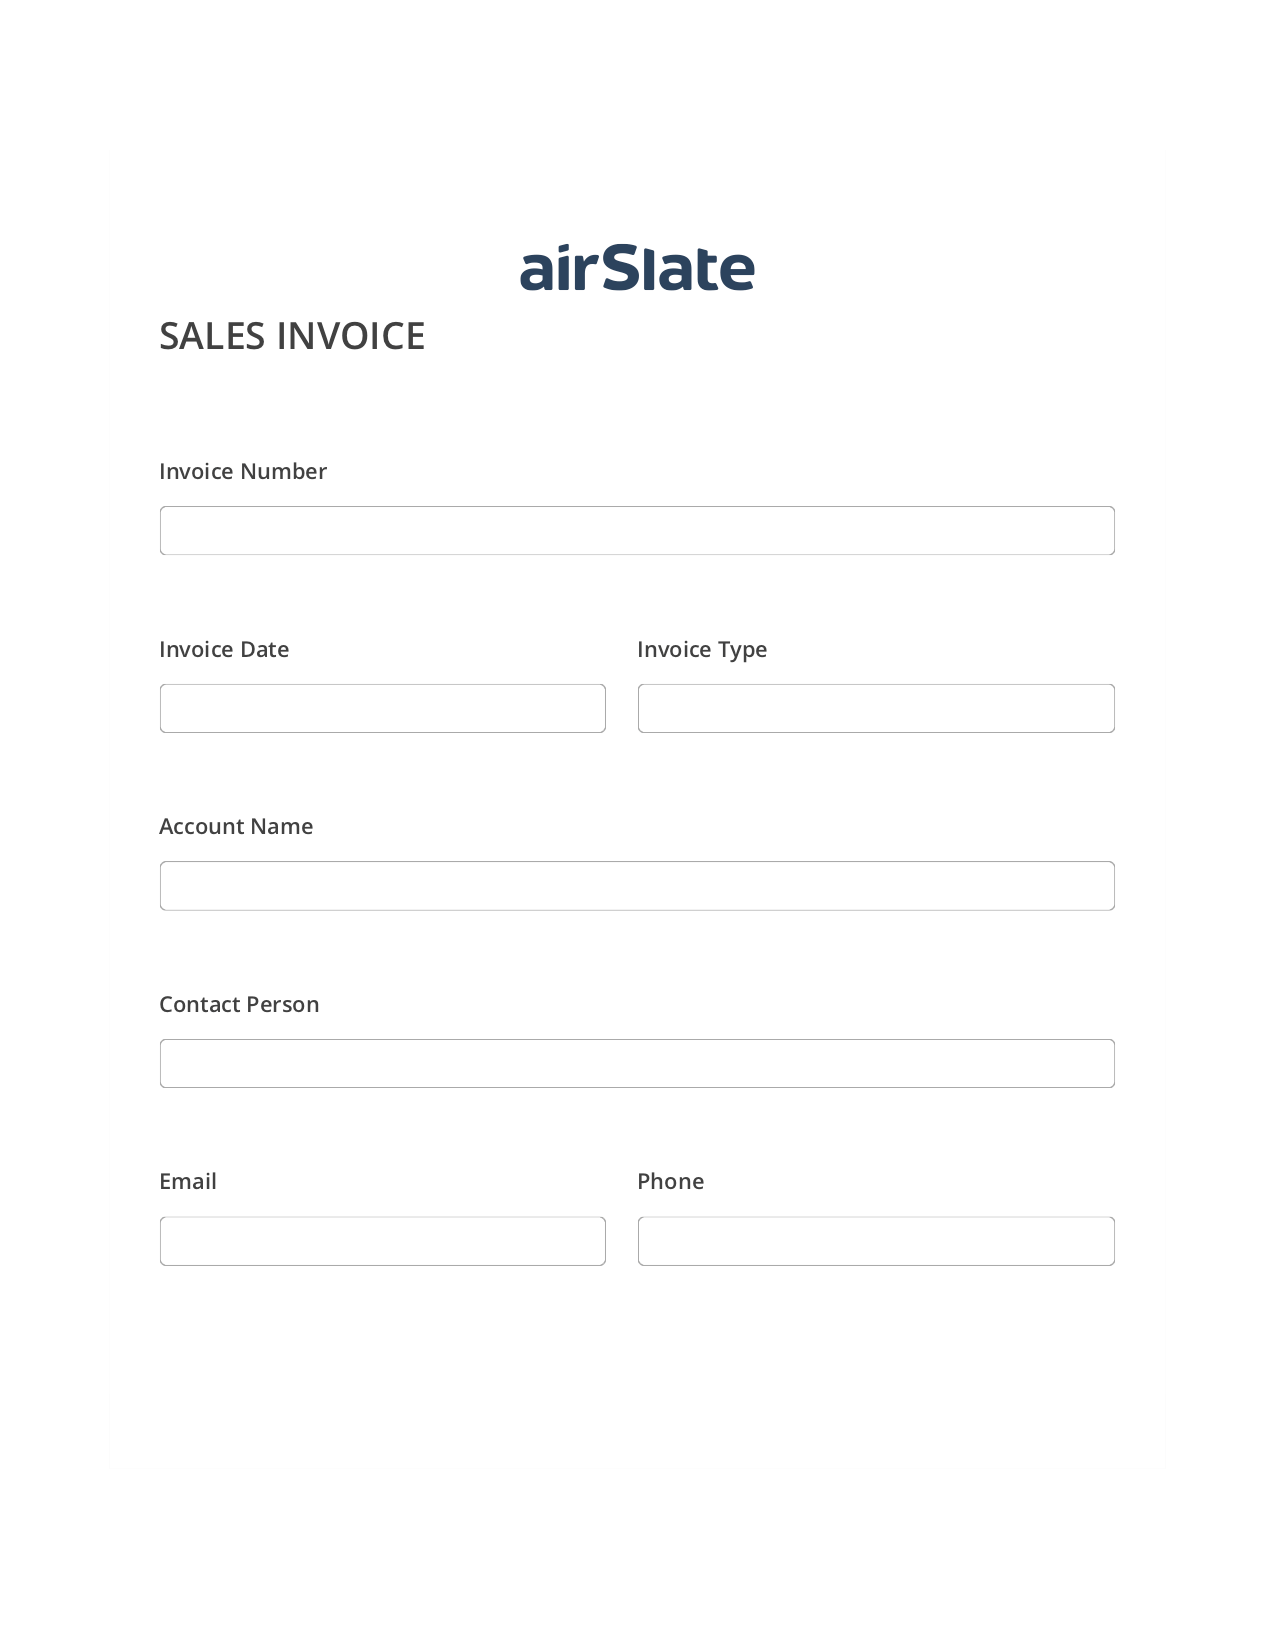 Sales Invoice Workflow Pre-fill from Salesforce Records with SOQL Bot, Custom Field's Value Bot, Archive to Google Drive Bot